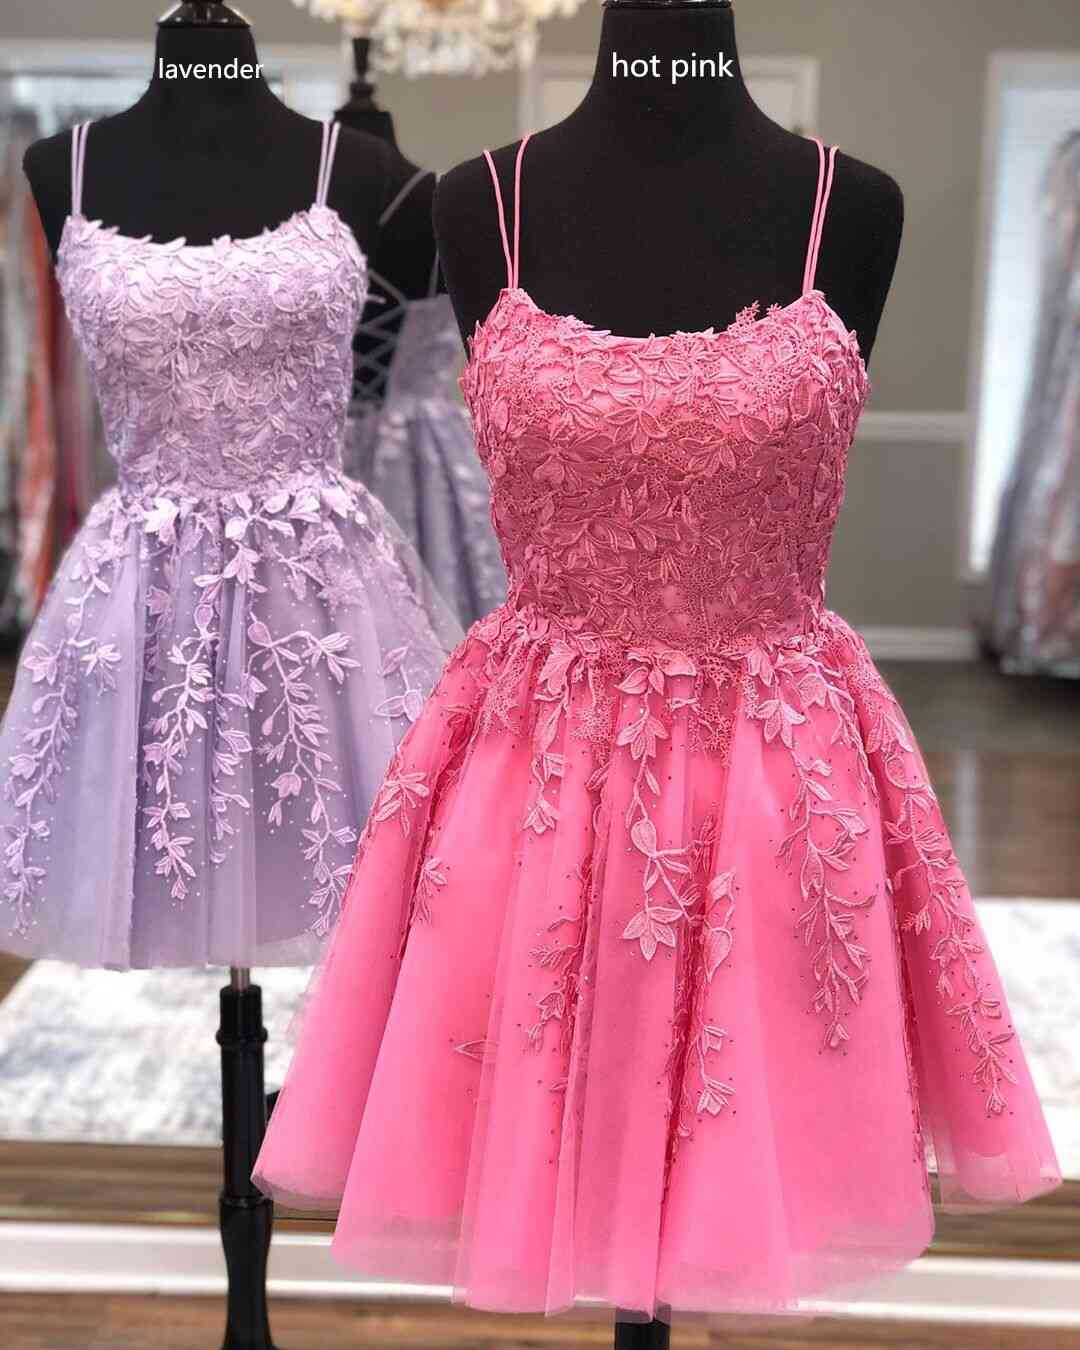 Lace Homecoming Dress, Short Prom Dress ,Dresses For Graduation Party, Evening Dress, Formal Dress, DTH0752